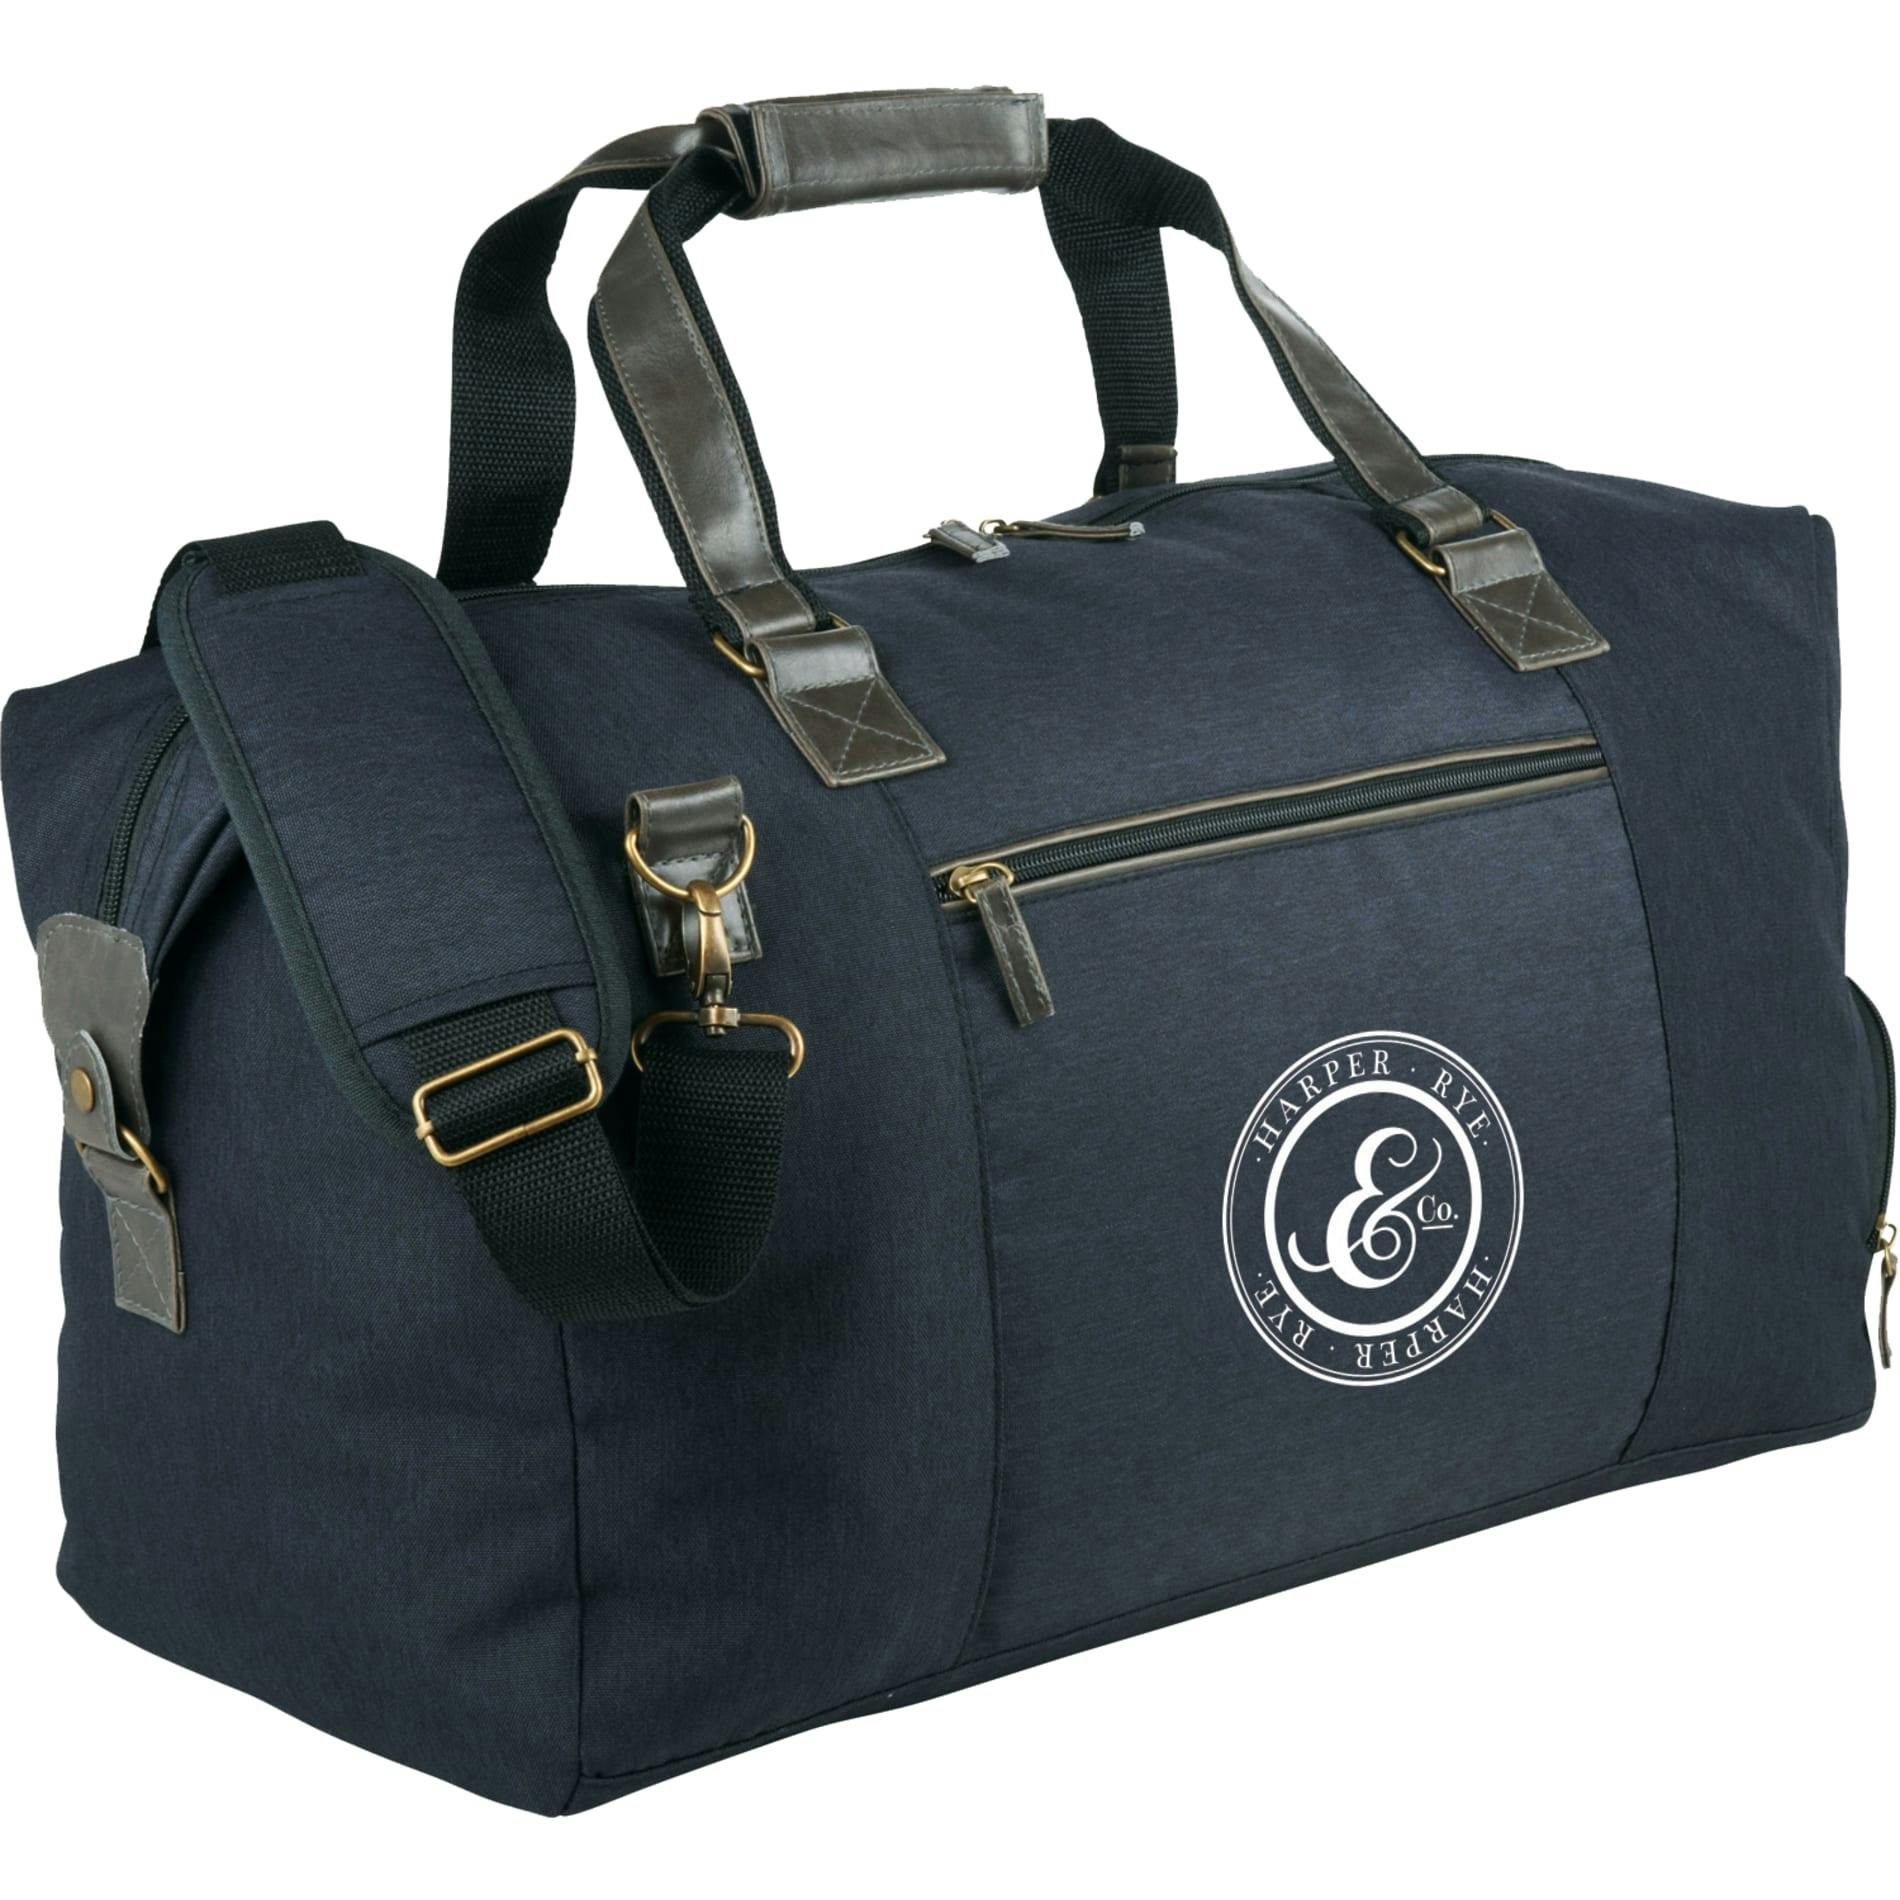 The Capitol 20" Duffel Bag - additional Image 3